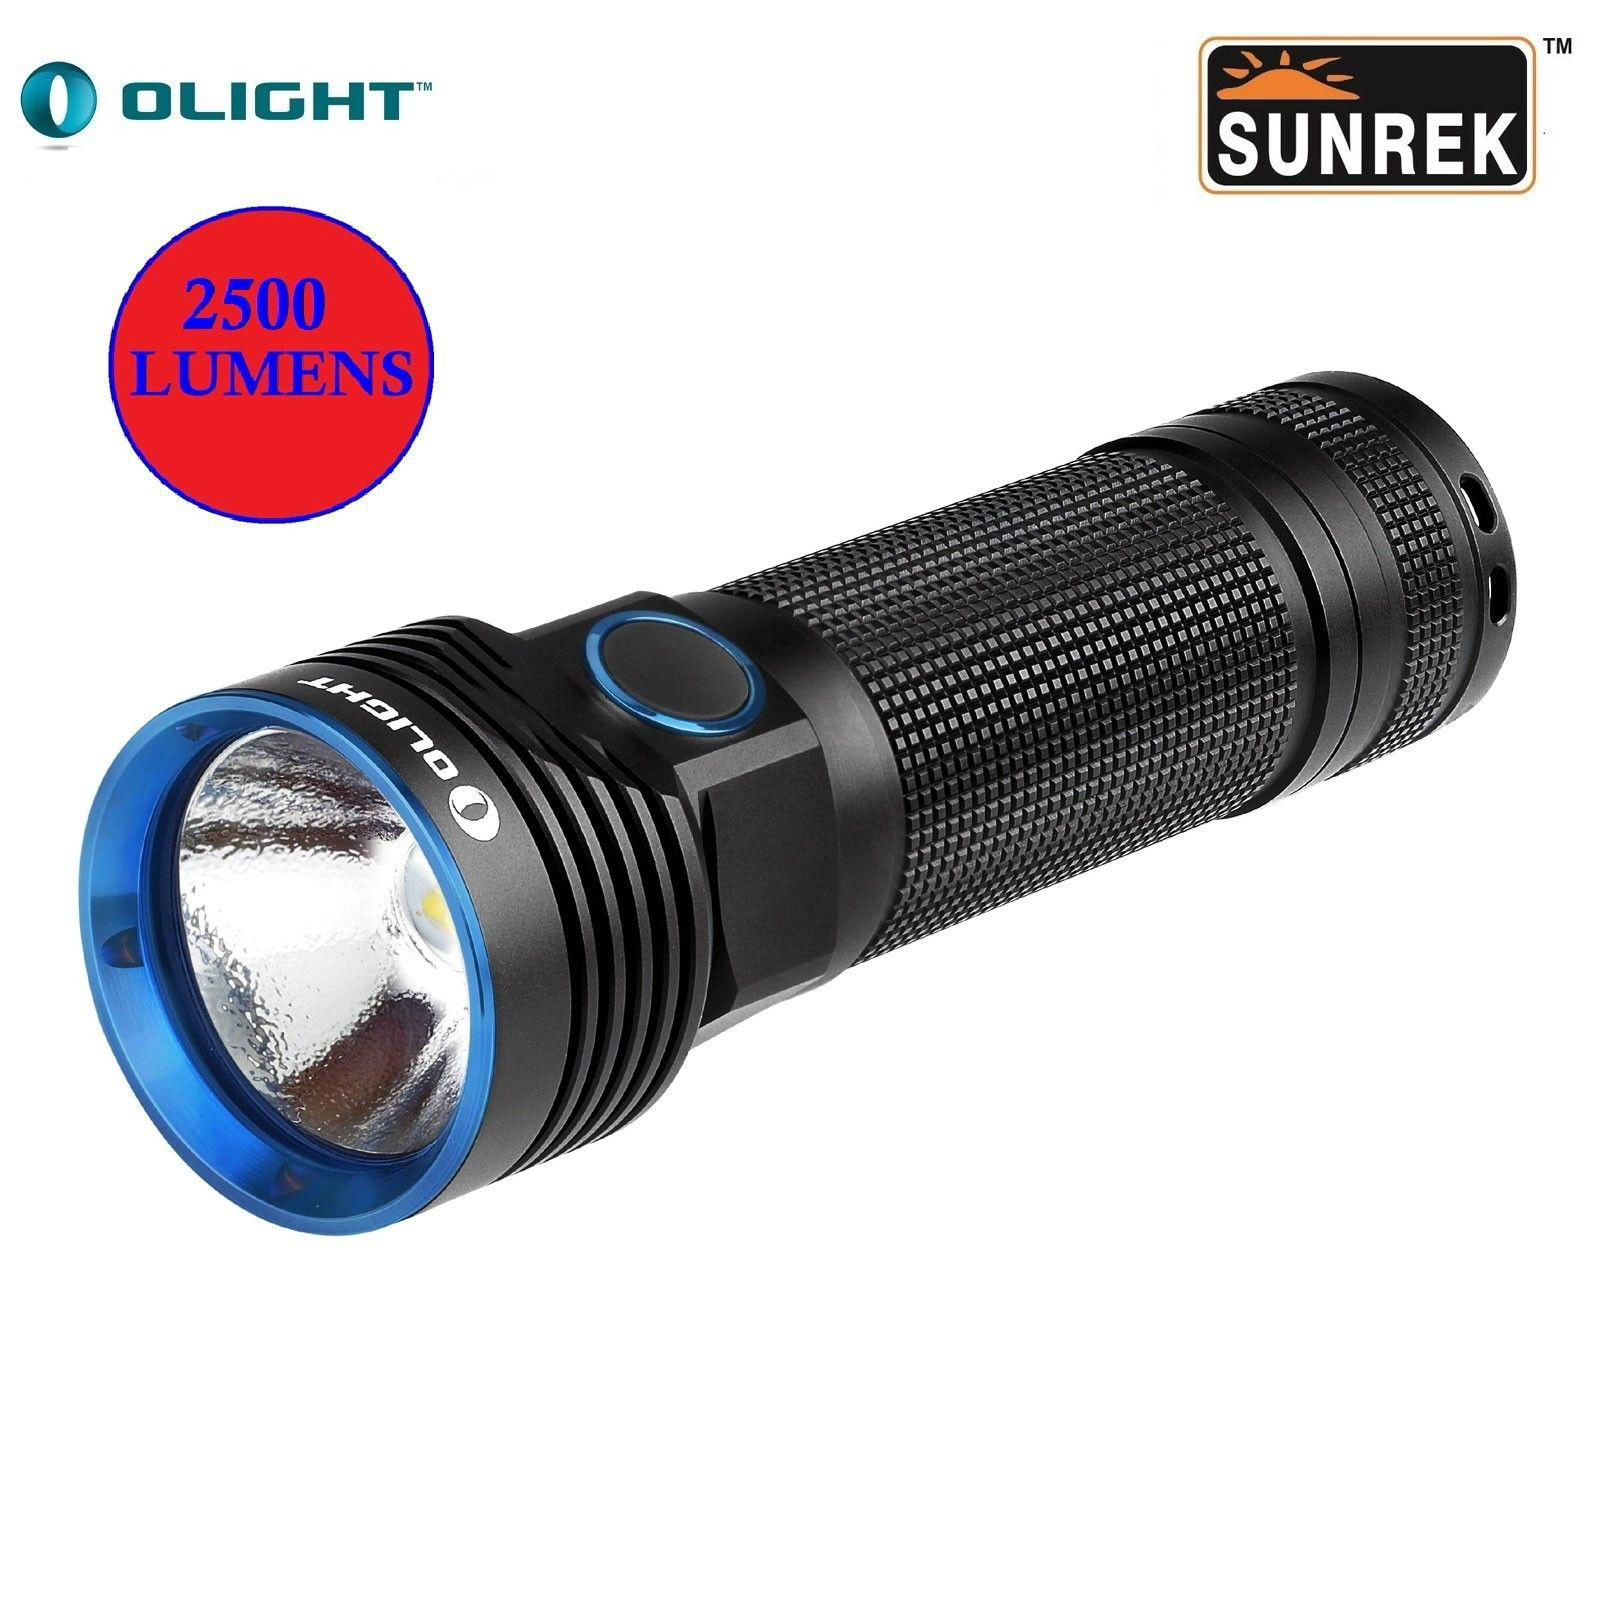 OLIGHT R50 SEEKER RECHARGEABLE SIDE SWITCH LED FLASHLIGHT MAX 2500 LUMENS